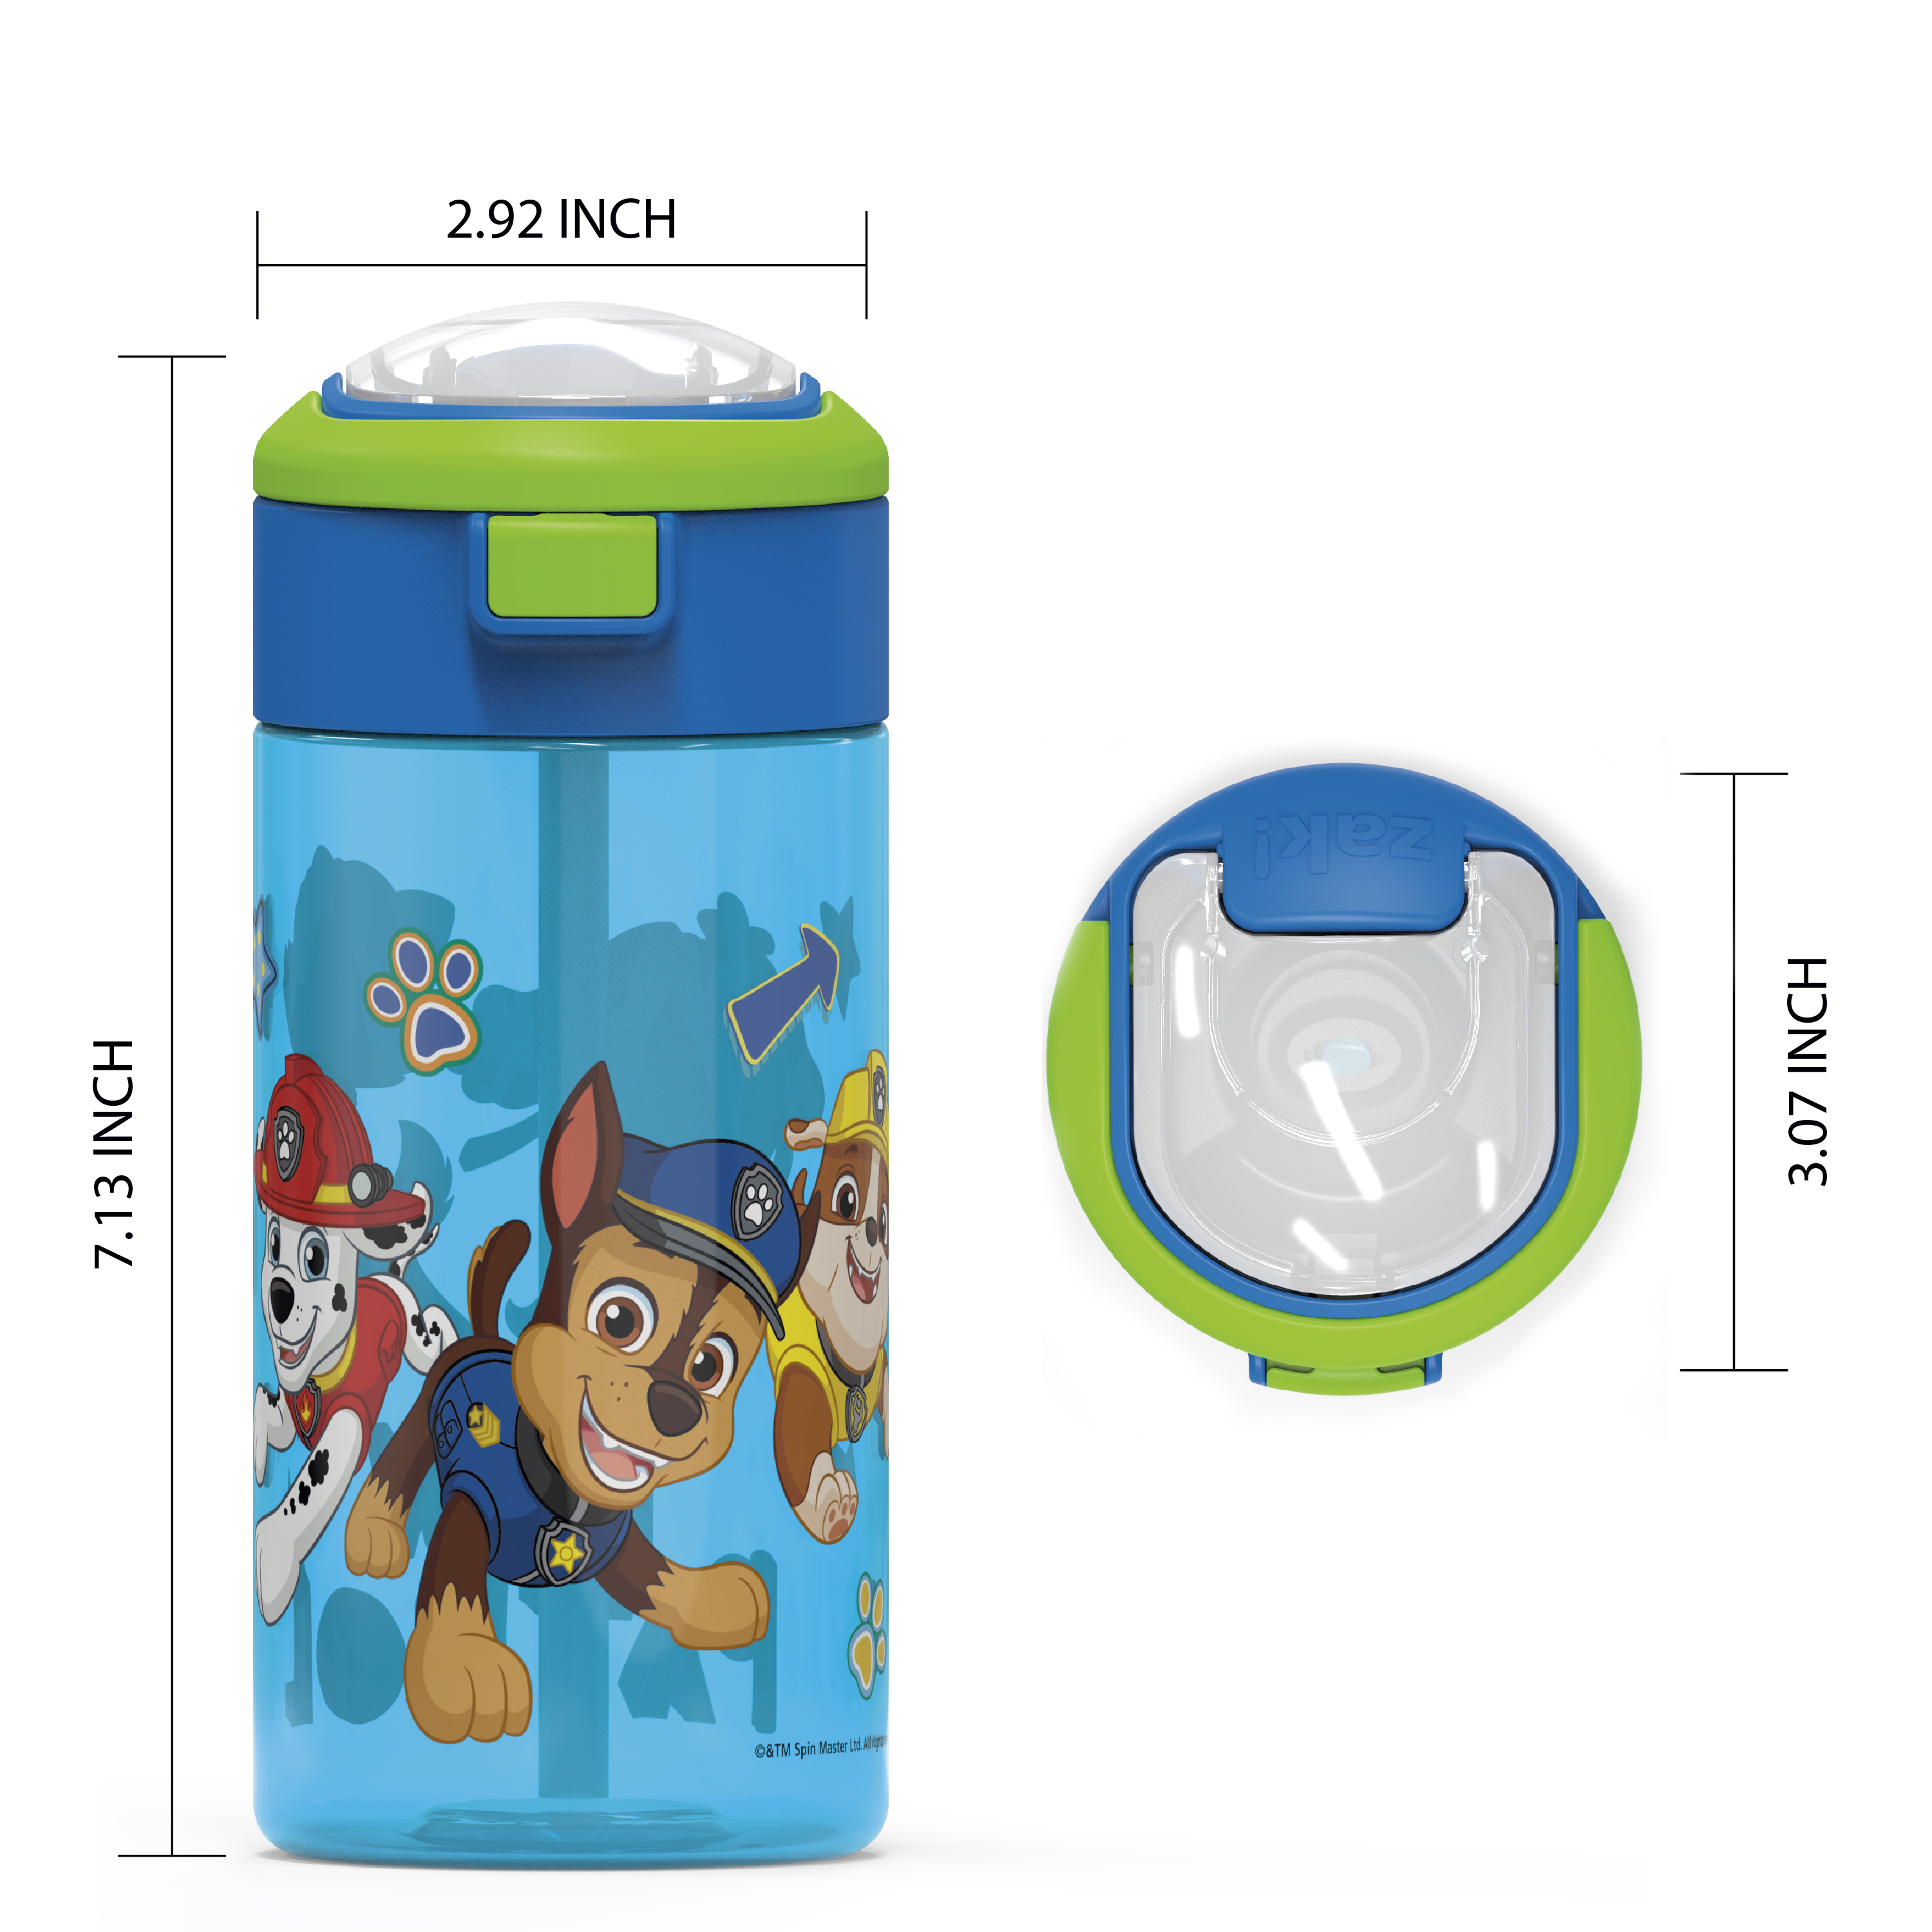 Paw Patrol 18 ounce Reusable Plastic Water Bottle with Push-button lid, Chase, Marshall & Rubble slideshow image 6